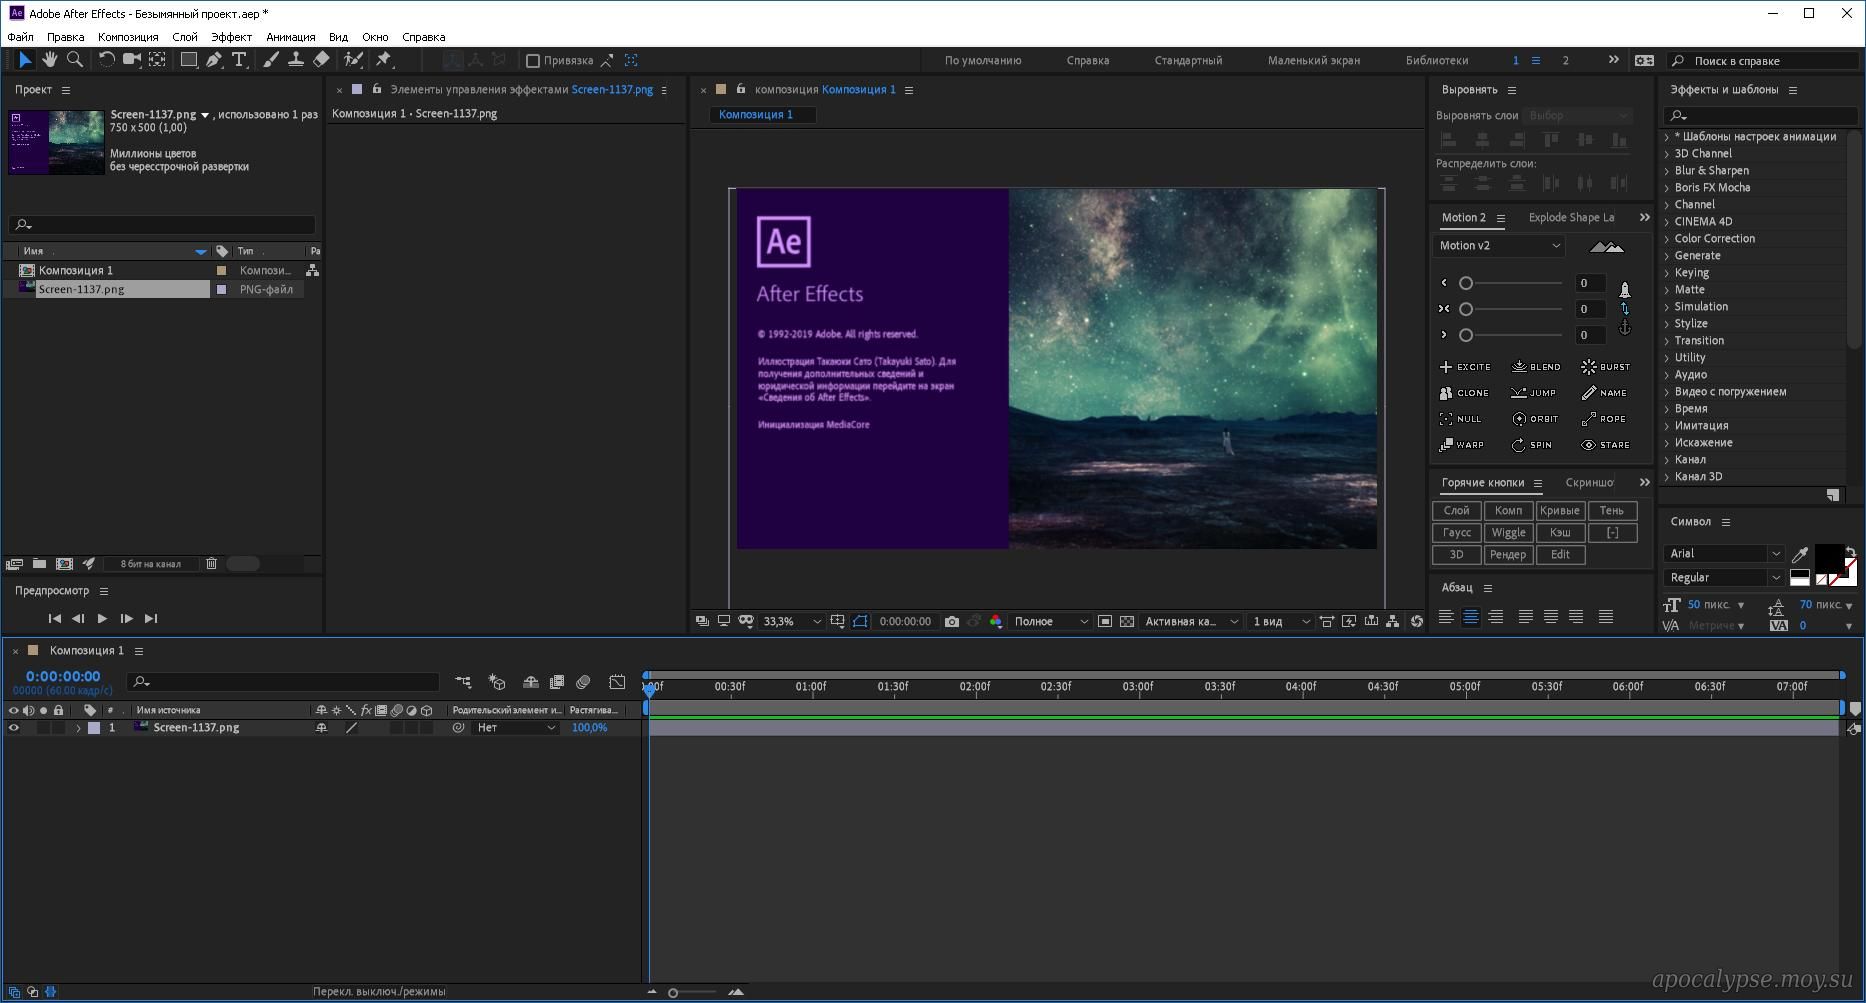 Adobe After Effects 2020 17.0.0.555 (x64) Multilingual